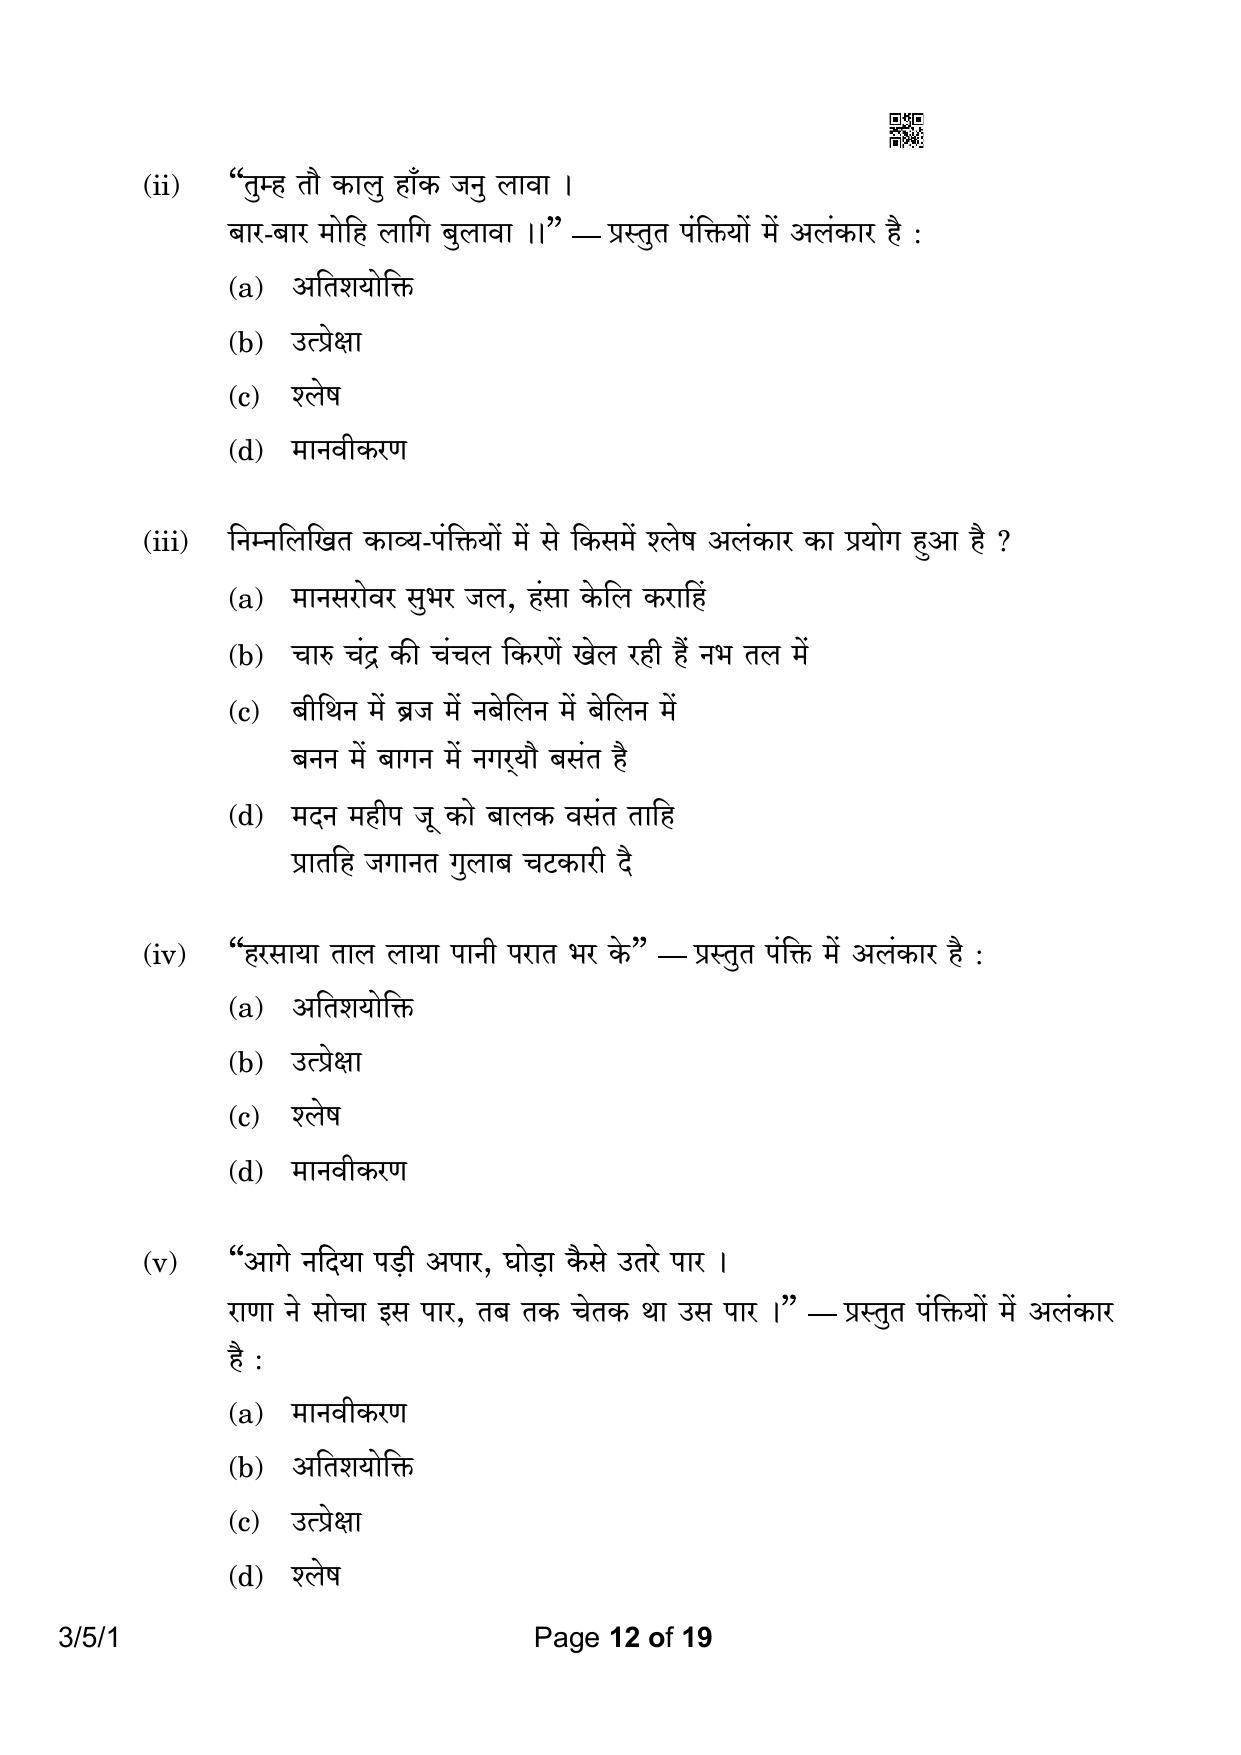 CBSE Class 10 3-5-1 Hindi A 2023 Question Paper - Page 12